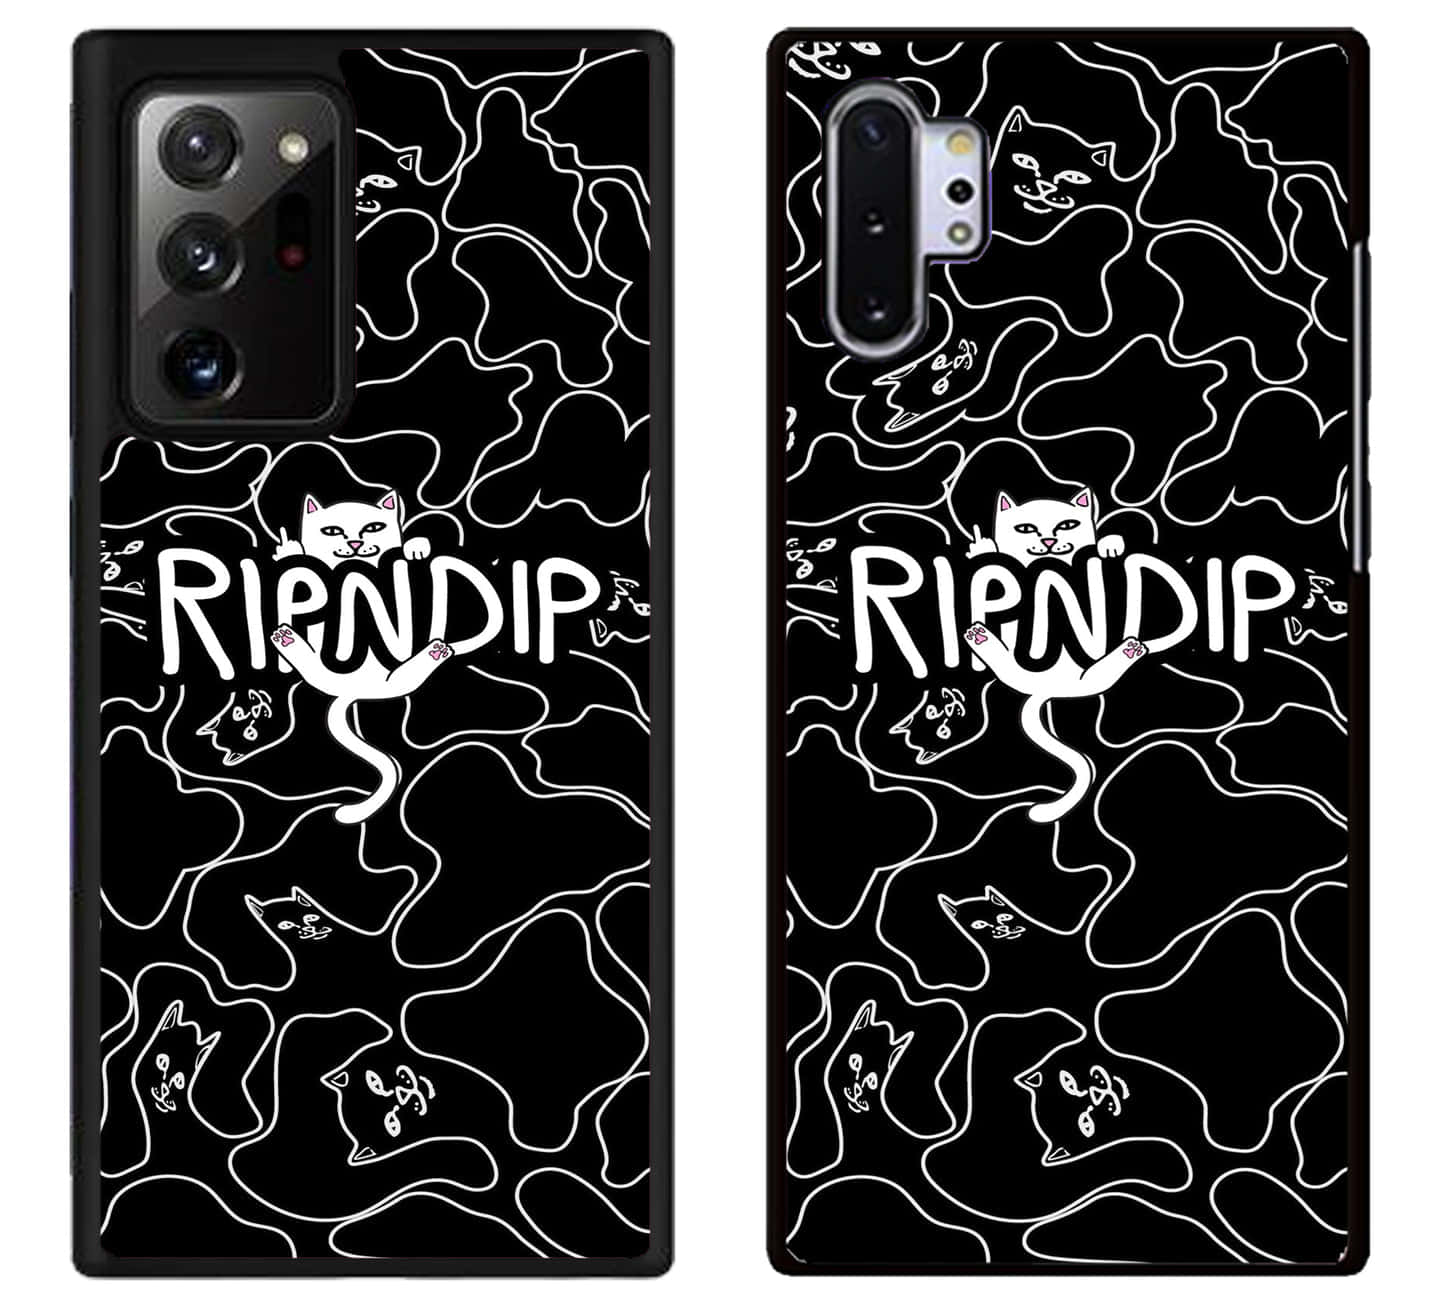 A Black And White Camouflage Samsung Galaxy S10 Case With The Word Frienddip